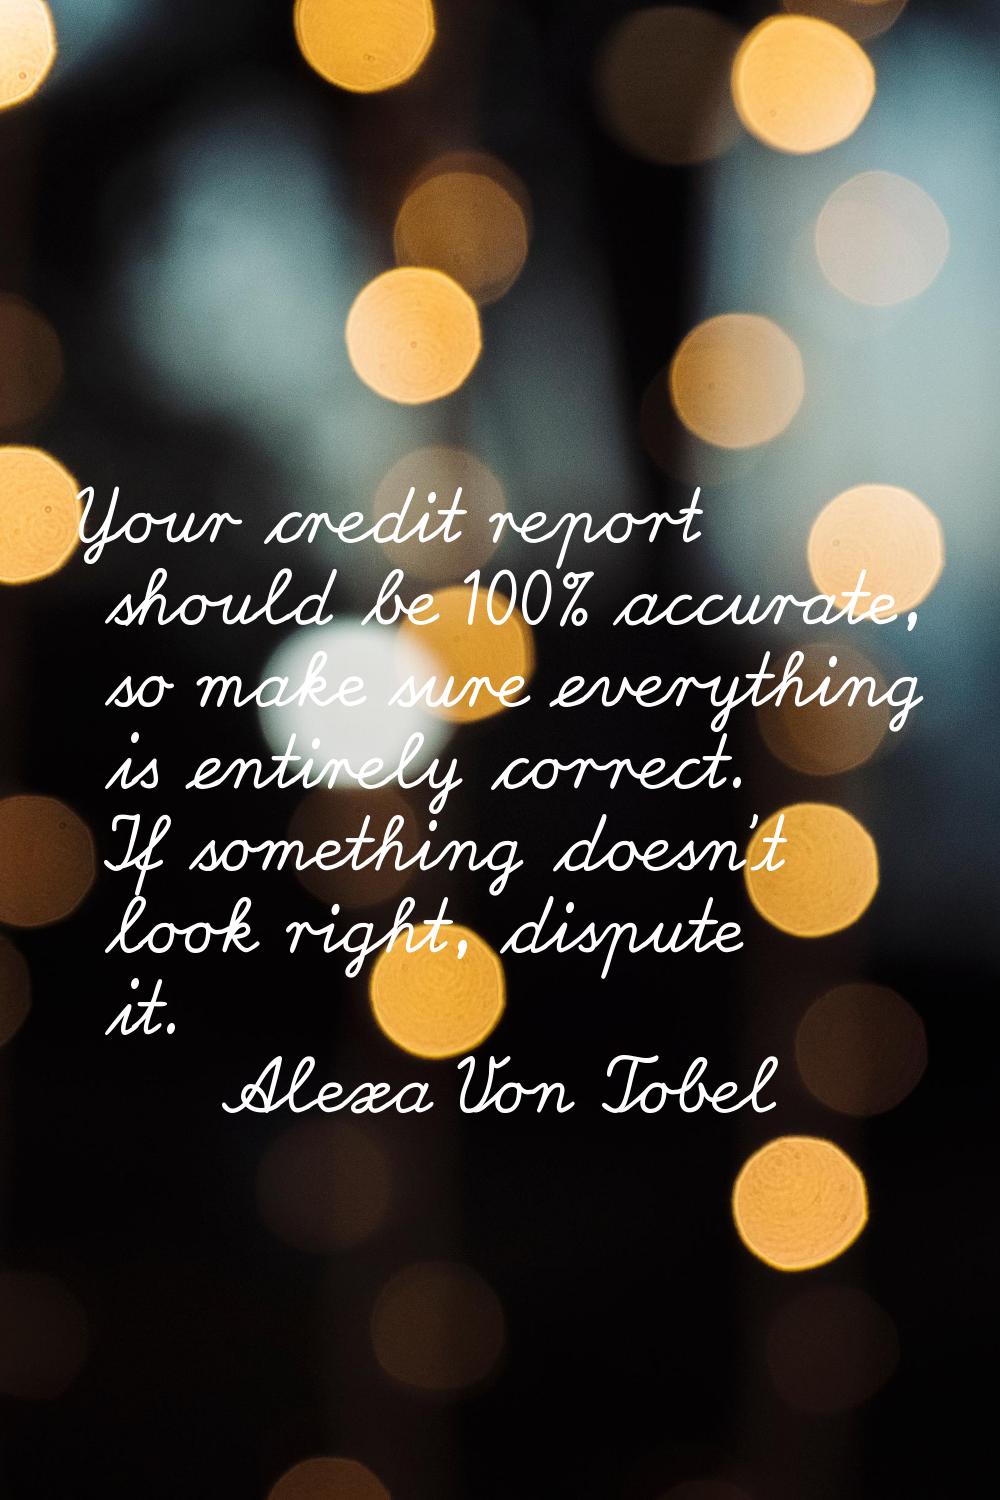 Your credit report should be 100% accurate, so make sure everything is entirely correct. If somethi